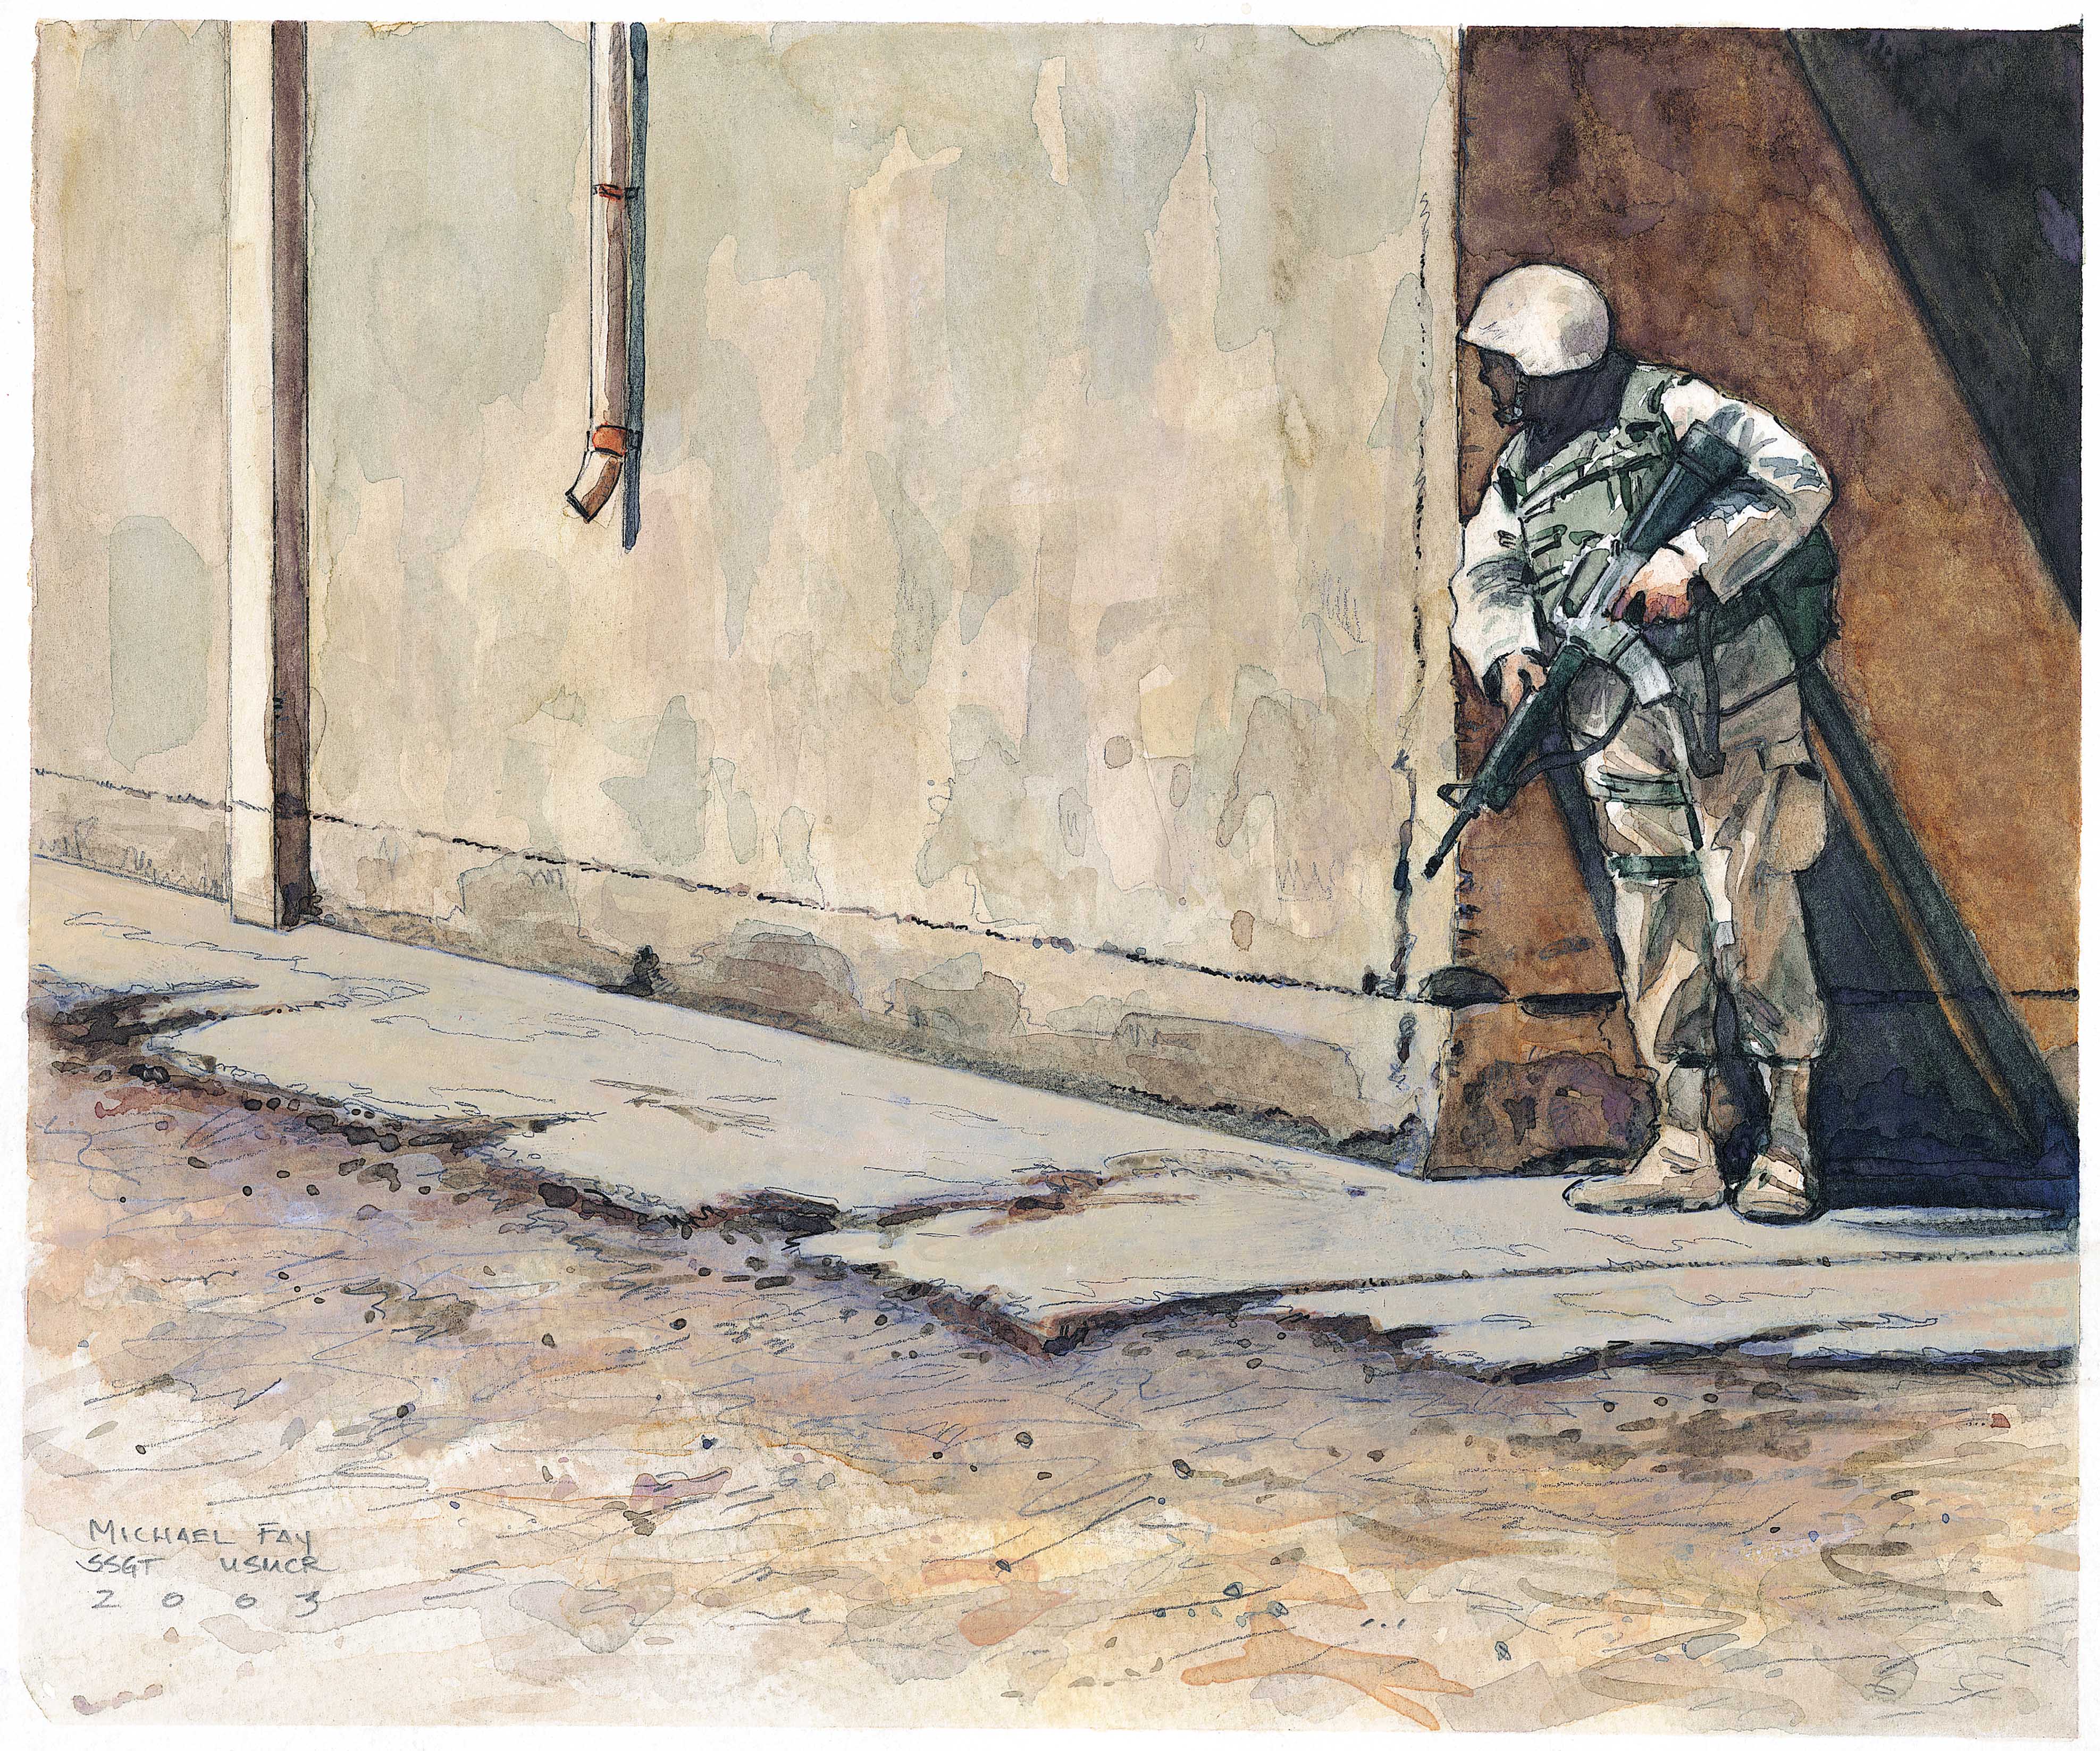 Raid outside Yusifiyah, Iraq by Chief Warrant Officer 2 Michael D. Fay, USMCR.  Watercolor and pen wash on paper.  A Marine armed with an M-16A2 rifle and protected by body armor stands ready to engage the enemy in a street outside Yusufiyah, a major city south of Baghdad, Iraq.  CONTRIBUTED